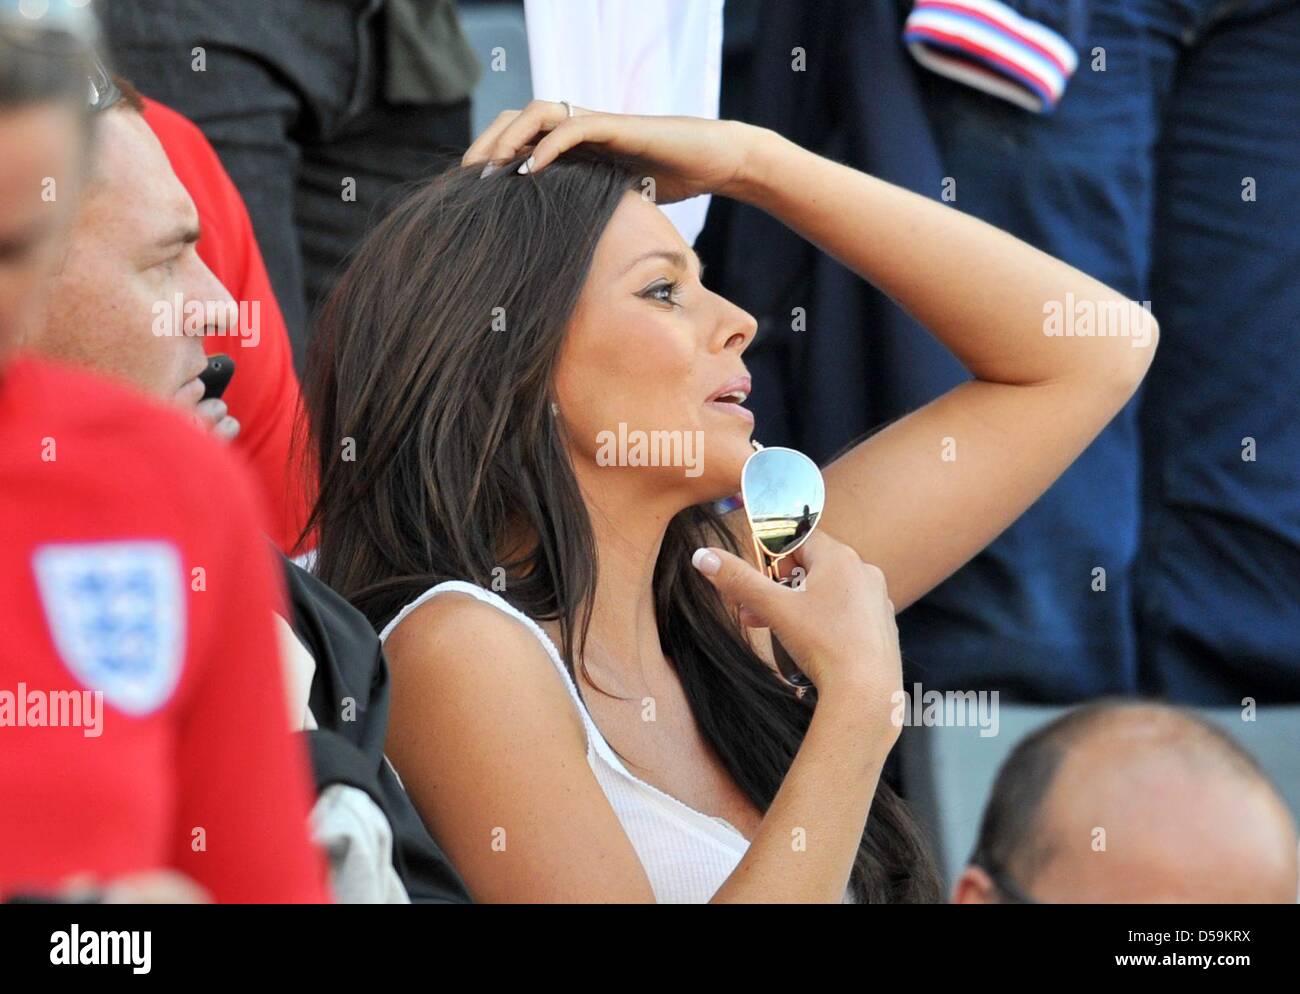 Toni Poole, wife of English player John Terry, in the stands prior the 2010 FIFA World Cup Round of Sixteen match between Germany and England at the Free State Stadium in Bloemfontein, South Africa 27 June 2010. Photo: Bernd Weissbrod dpa - Please refer to http://dpaq.de/FIFA-WM2010-TC  +++(c) dpa - Bildfunk+++ Stock Photo